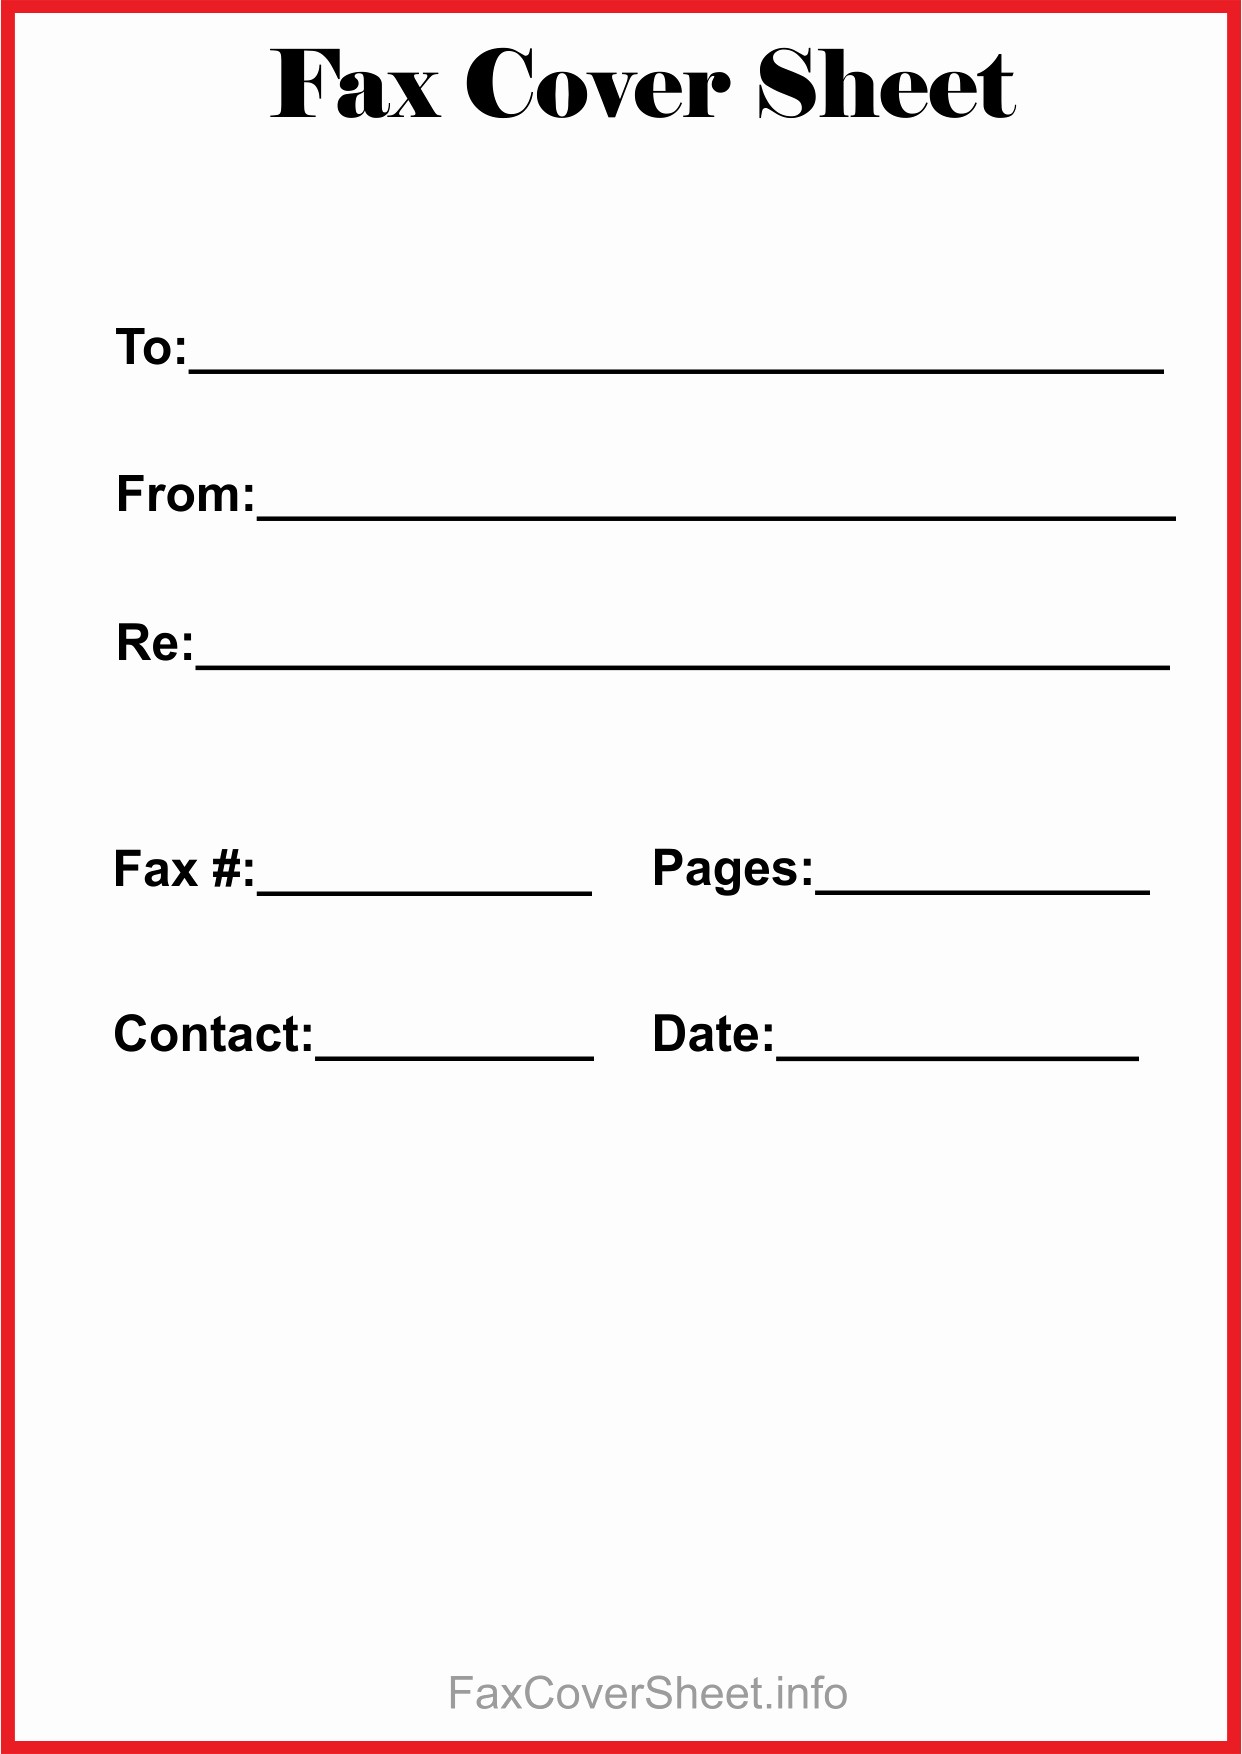 Free Fax Cover Sheets Template Unique Free Fax Cover Sheet Template Download